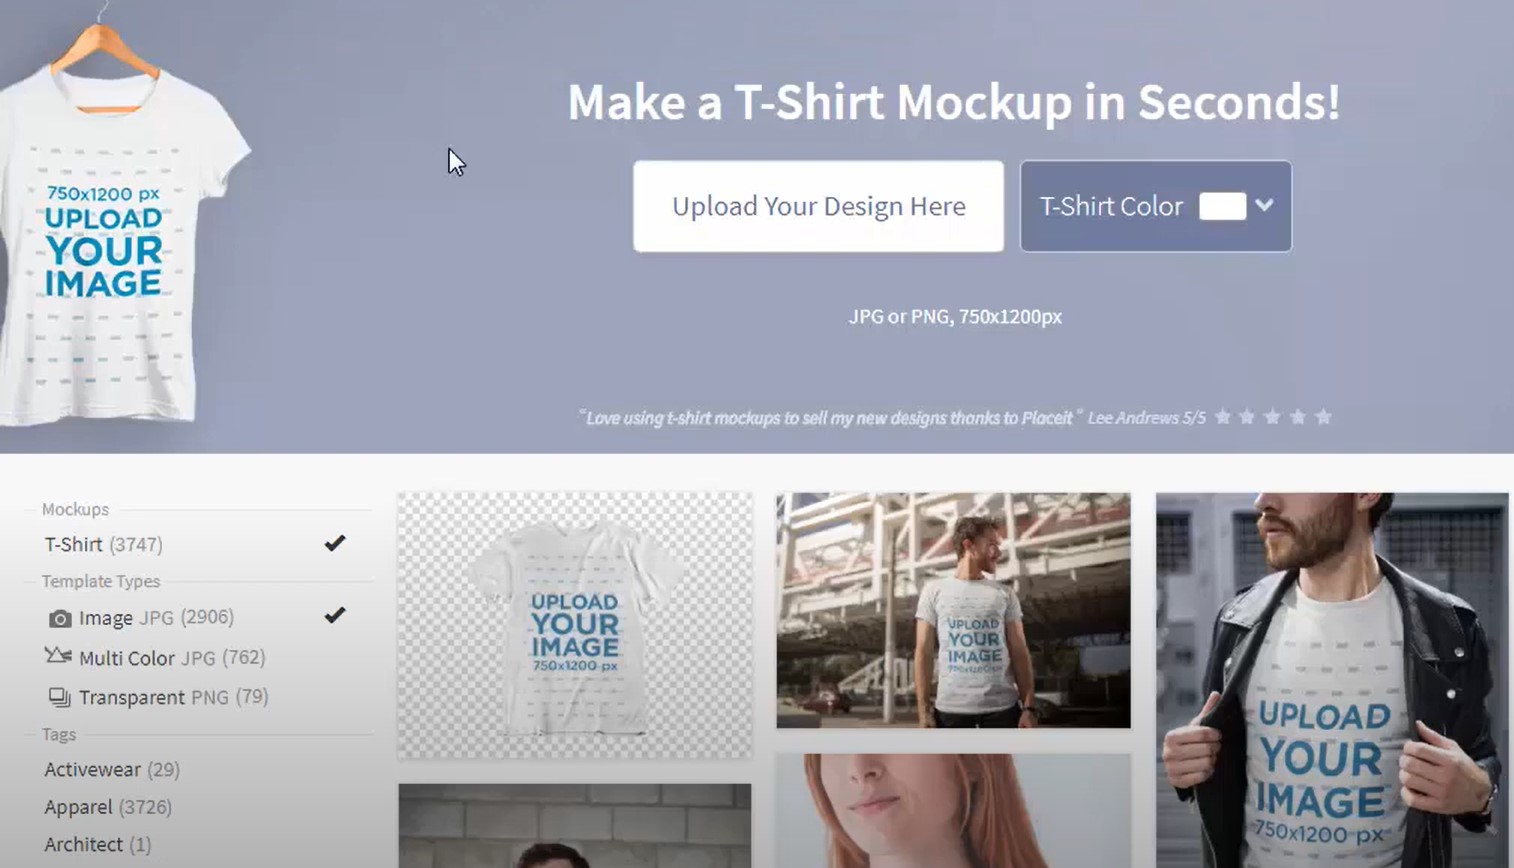 How to Make a Mockup Without Photoshop: 5 Easy Steps